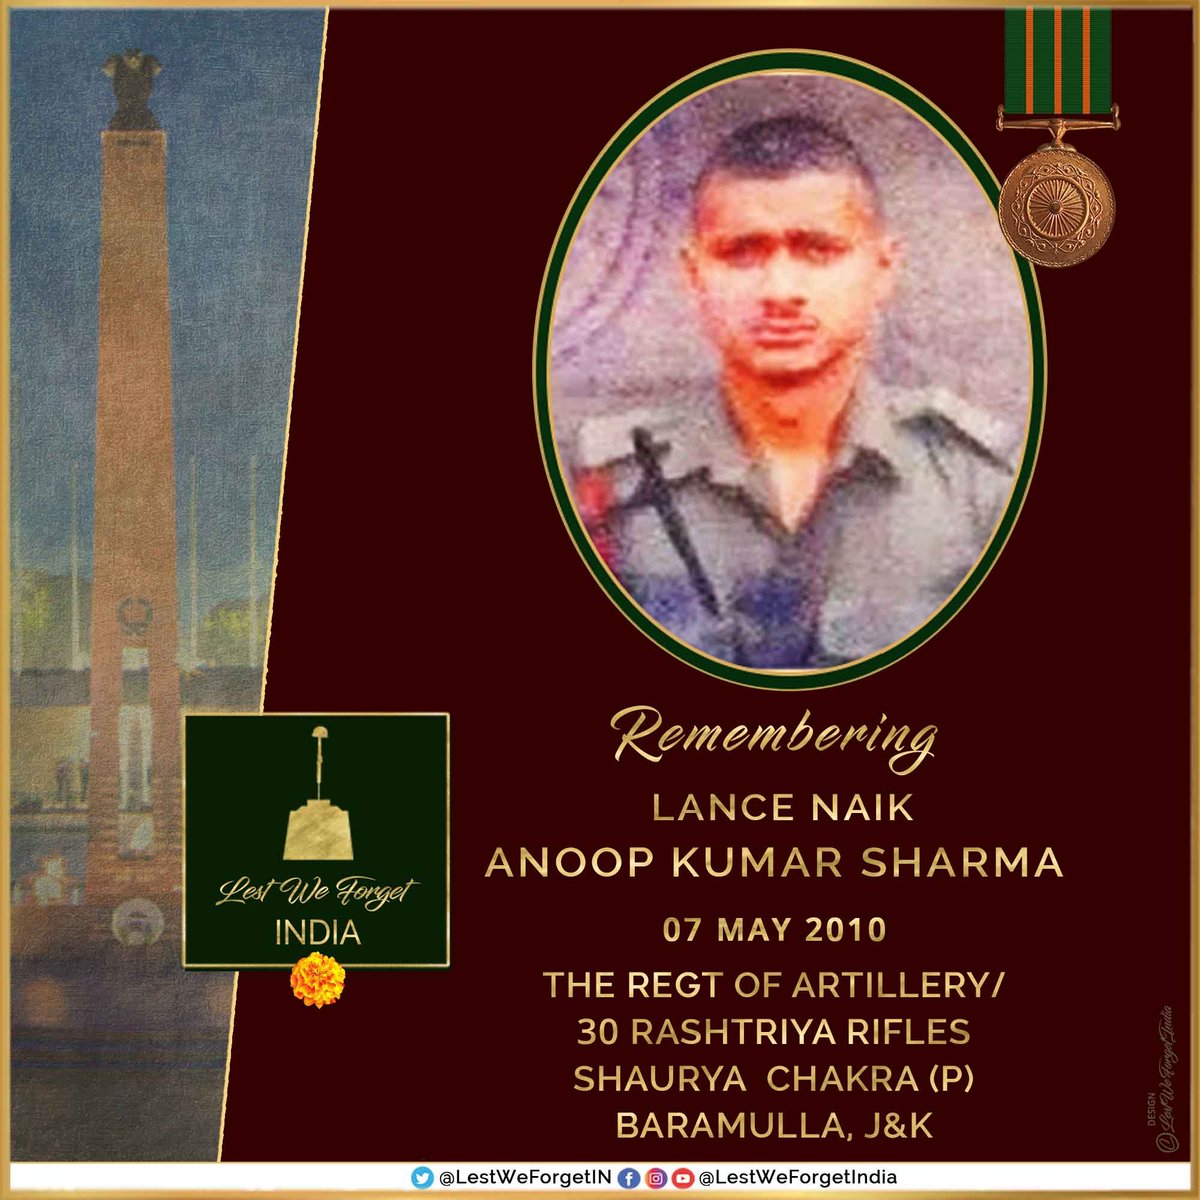 #LestWeForgetIndia🇮🇳 L/Nk Anoop Kumar Sharma, Shaurya Chakra (P), ARTY / 30 Rashtriya Rifles The gallant #IndianBrave laid down his life fighting terrorists and safeguarding his comrades in an Anti Terror Op at Baramulla, J&K #OnThisDay 07 May in 2010 On the night of 06/07…